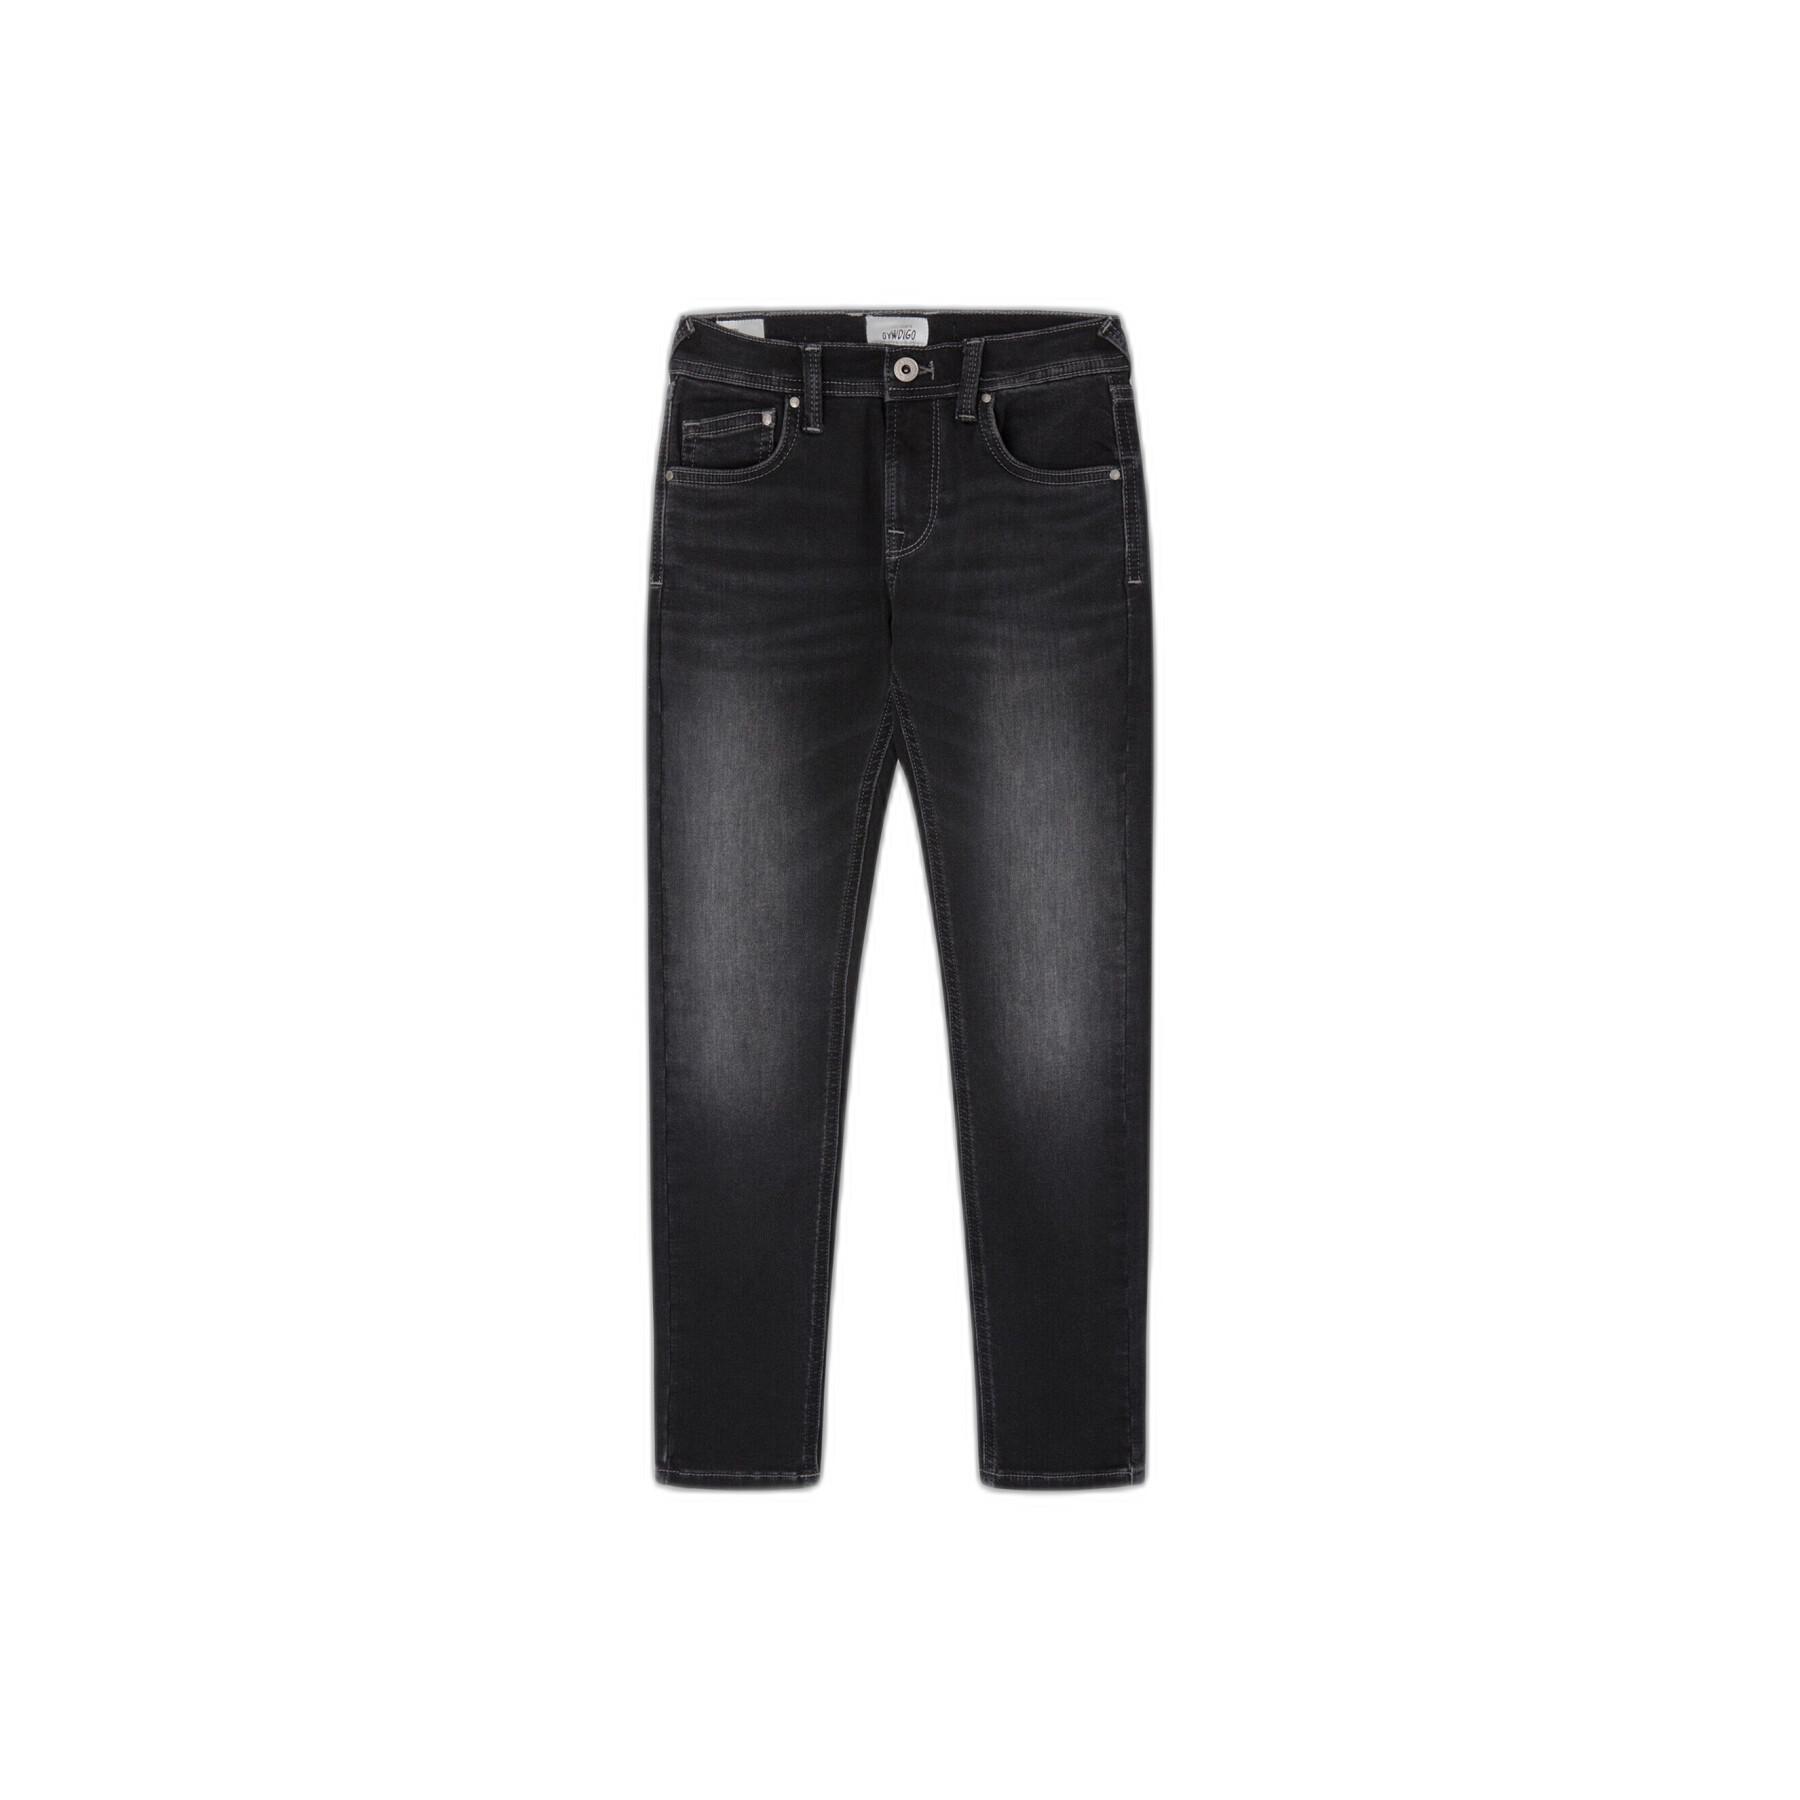 Children's jeans Pepe Jeans Finly